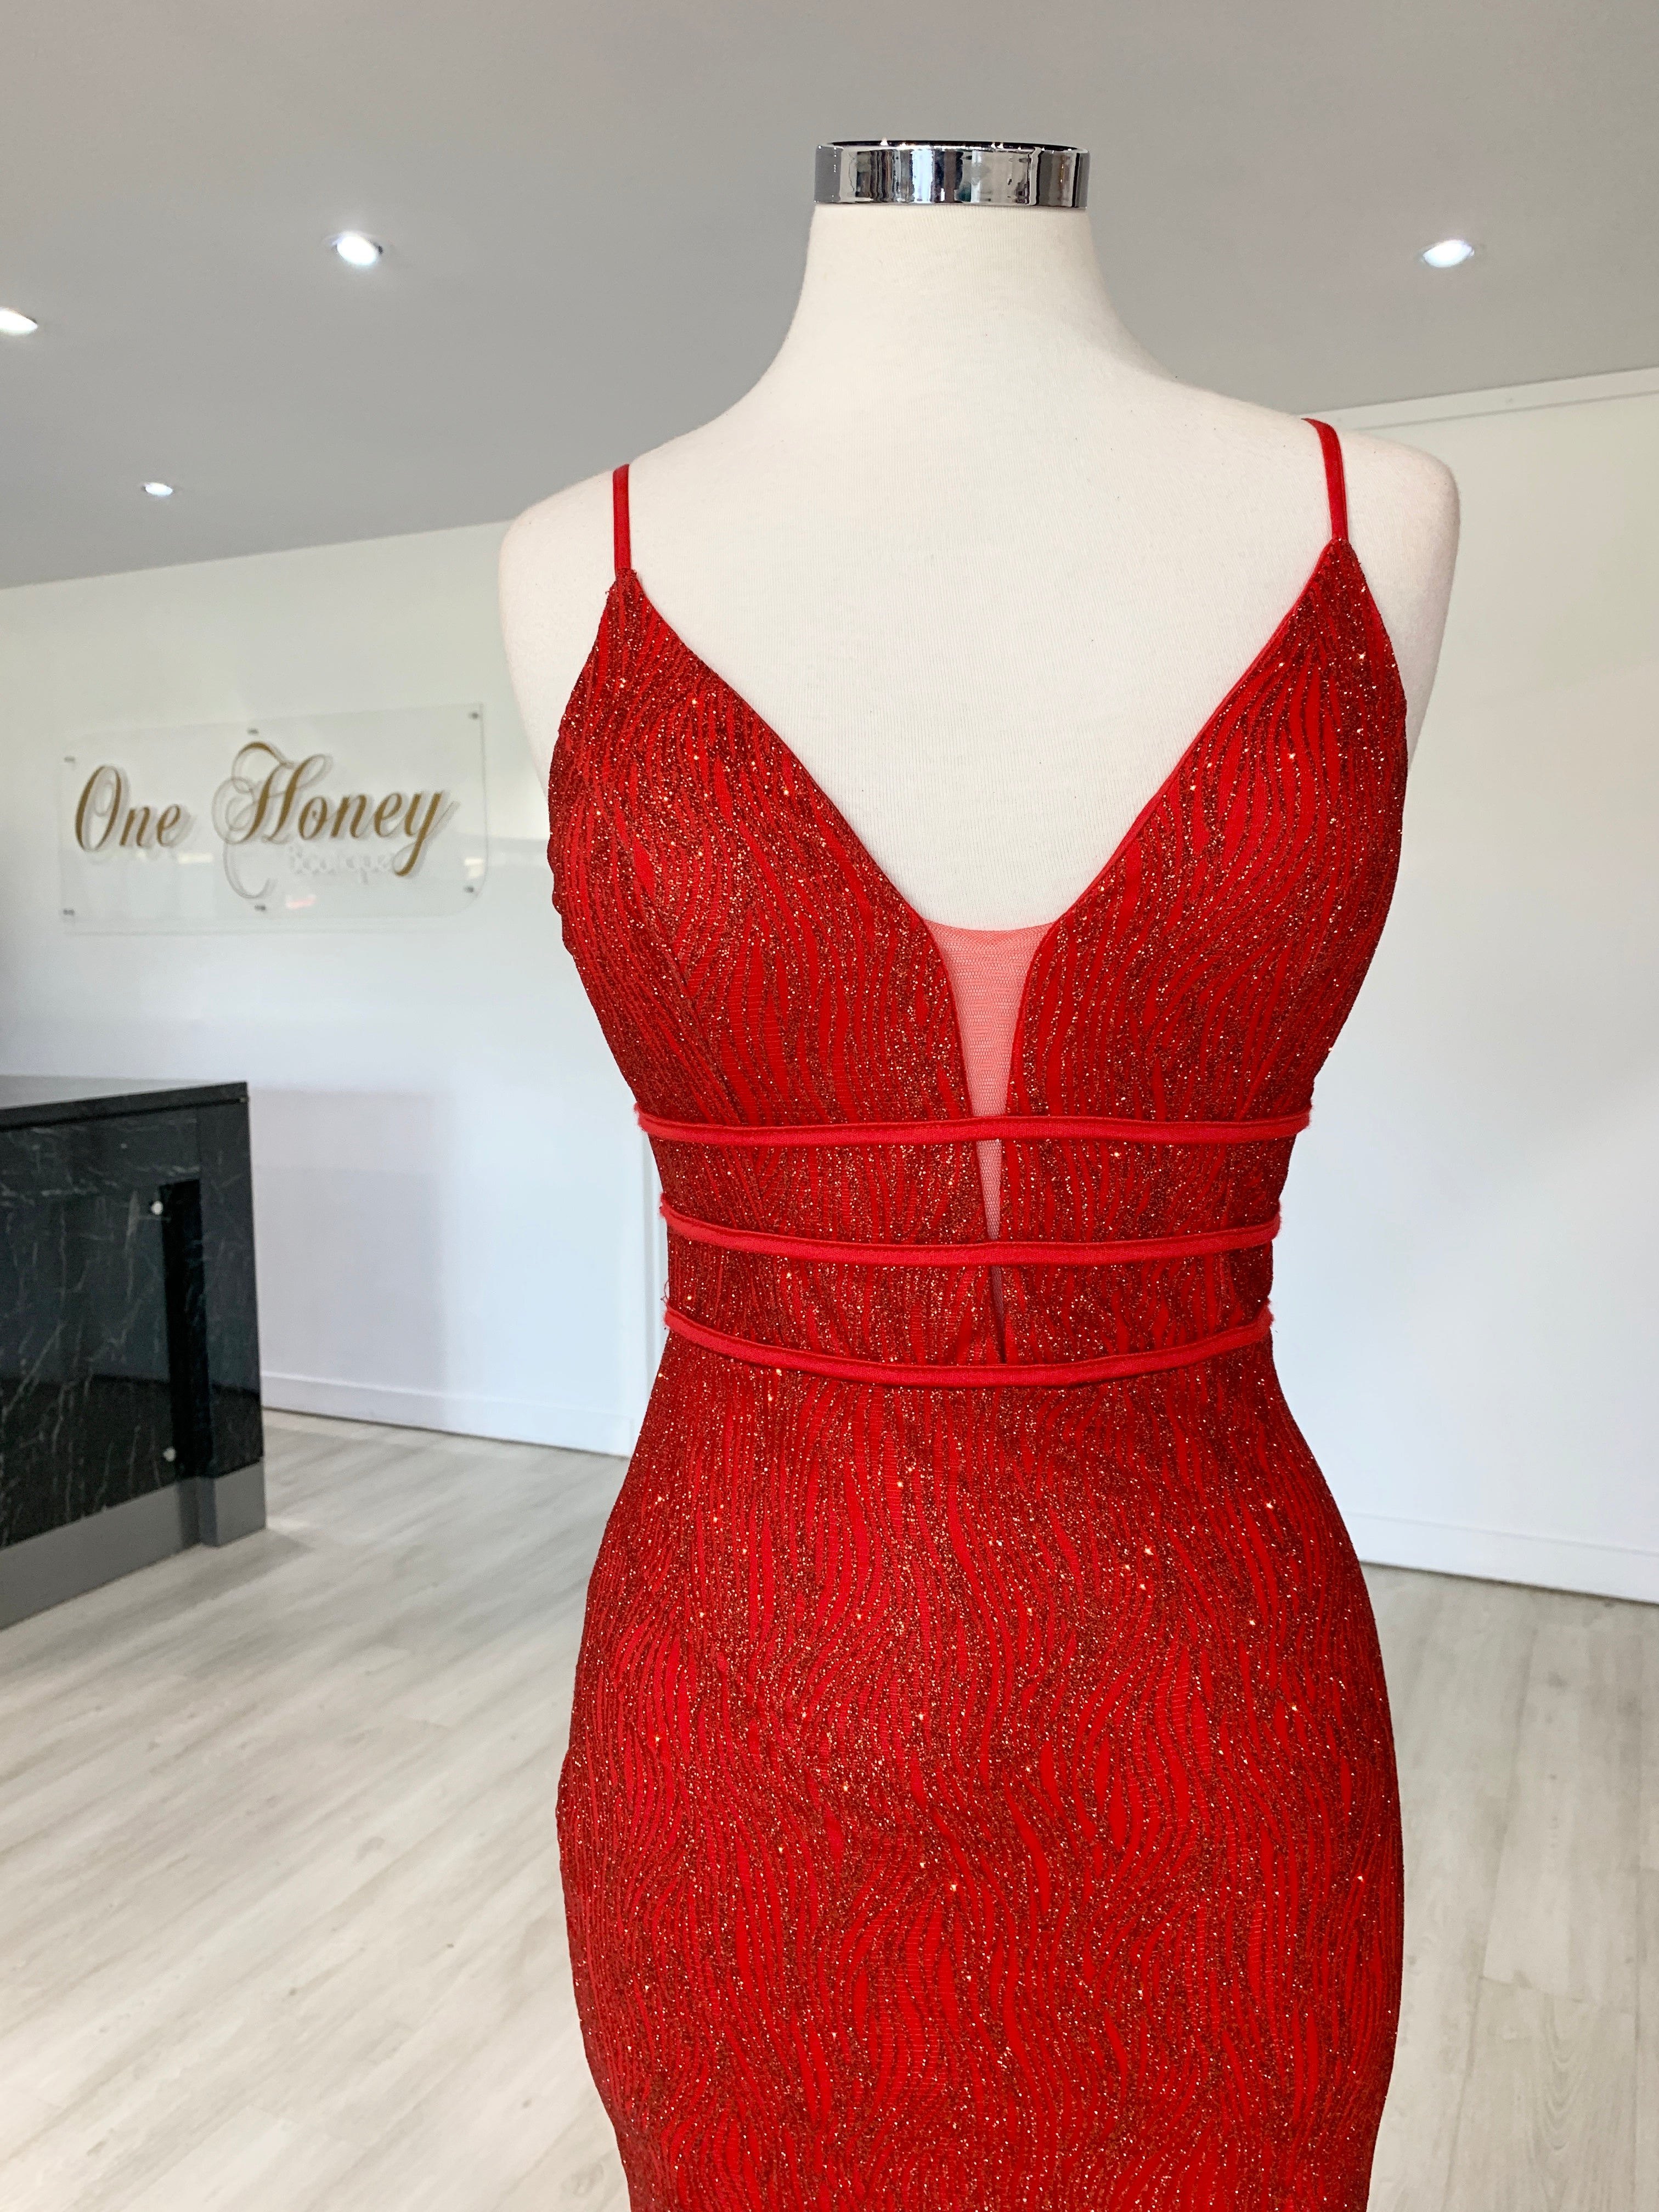 Honey Couture SARAI Red Glitter Mermaid Evening Gown Dress {vendor} AfterPay Humm ZipPay LayBuy Sezzle